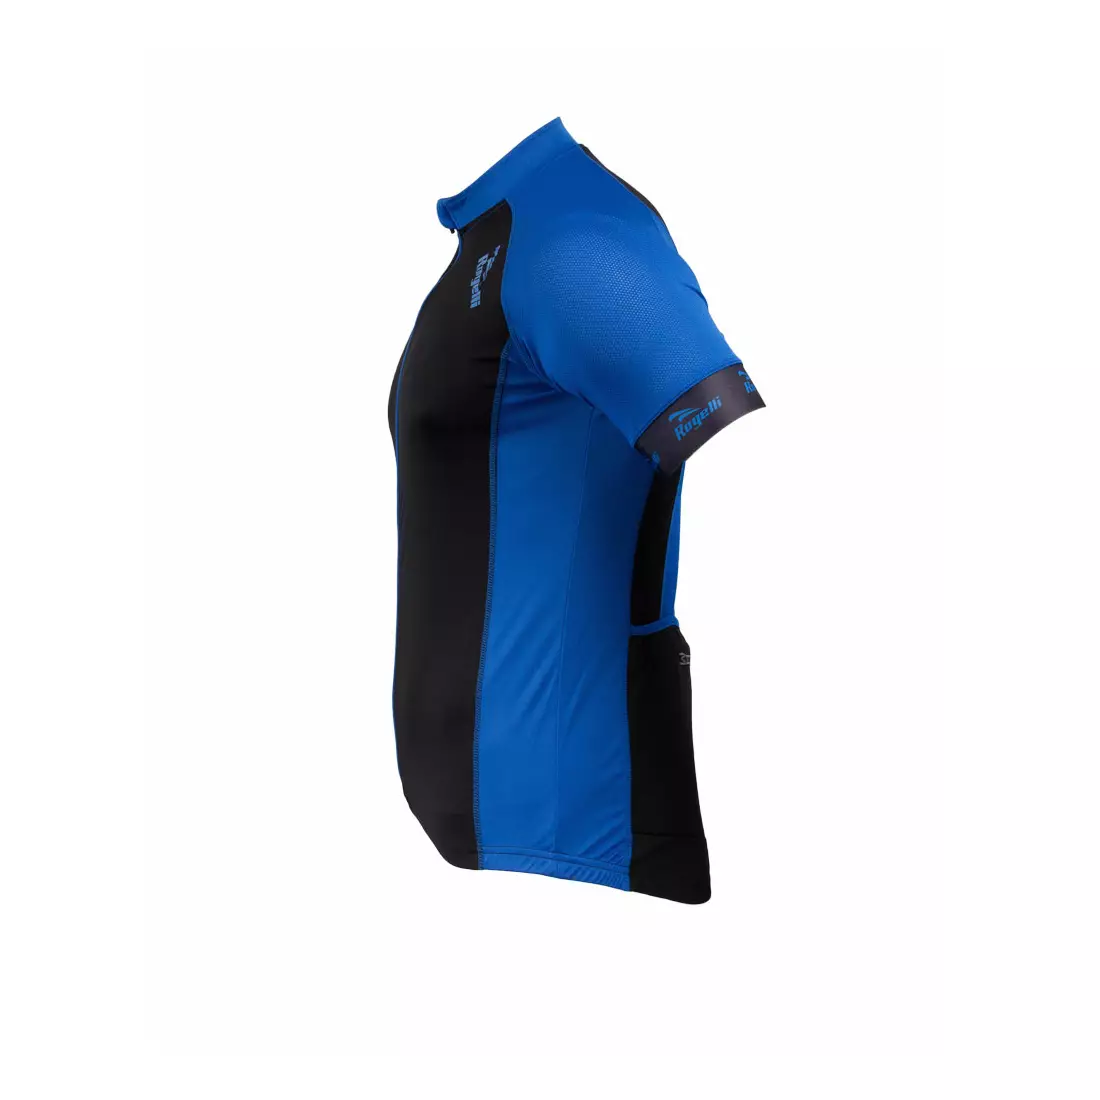 ROGELLI PRALI - men's cycling jersey, color: black and blue